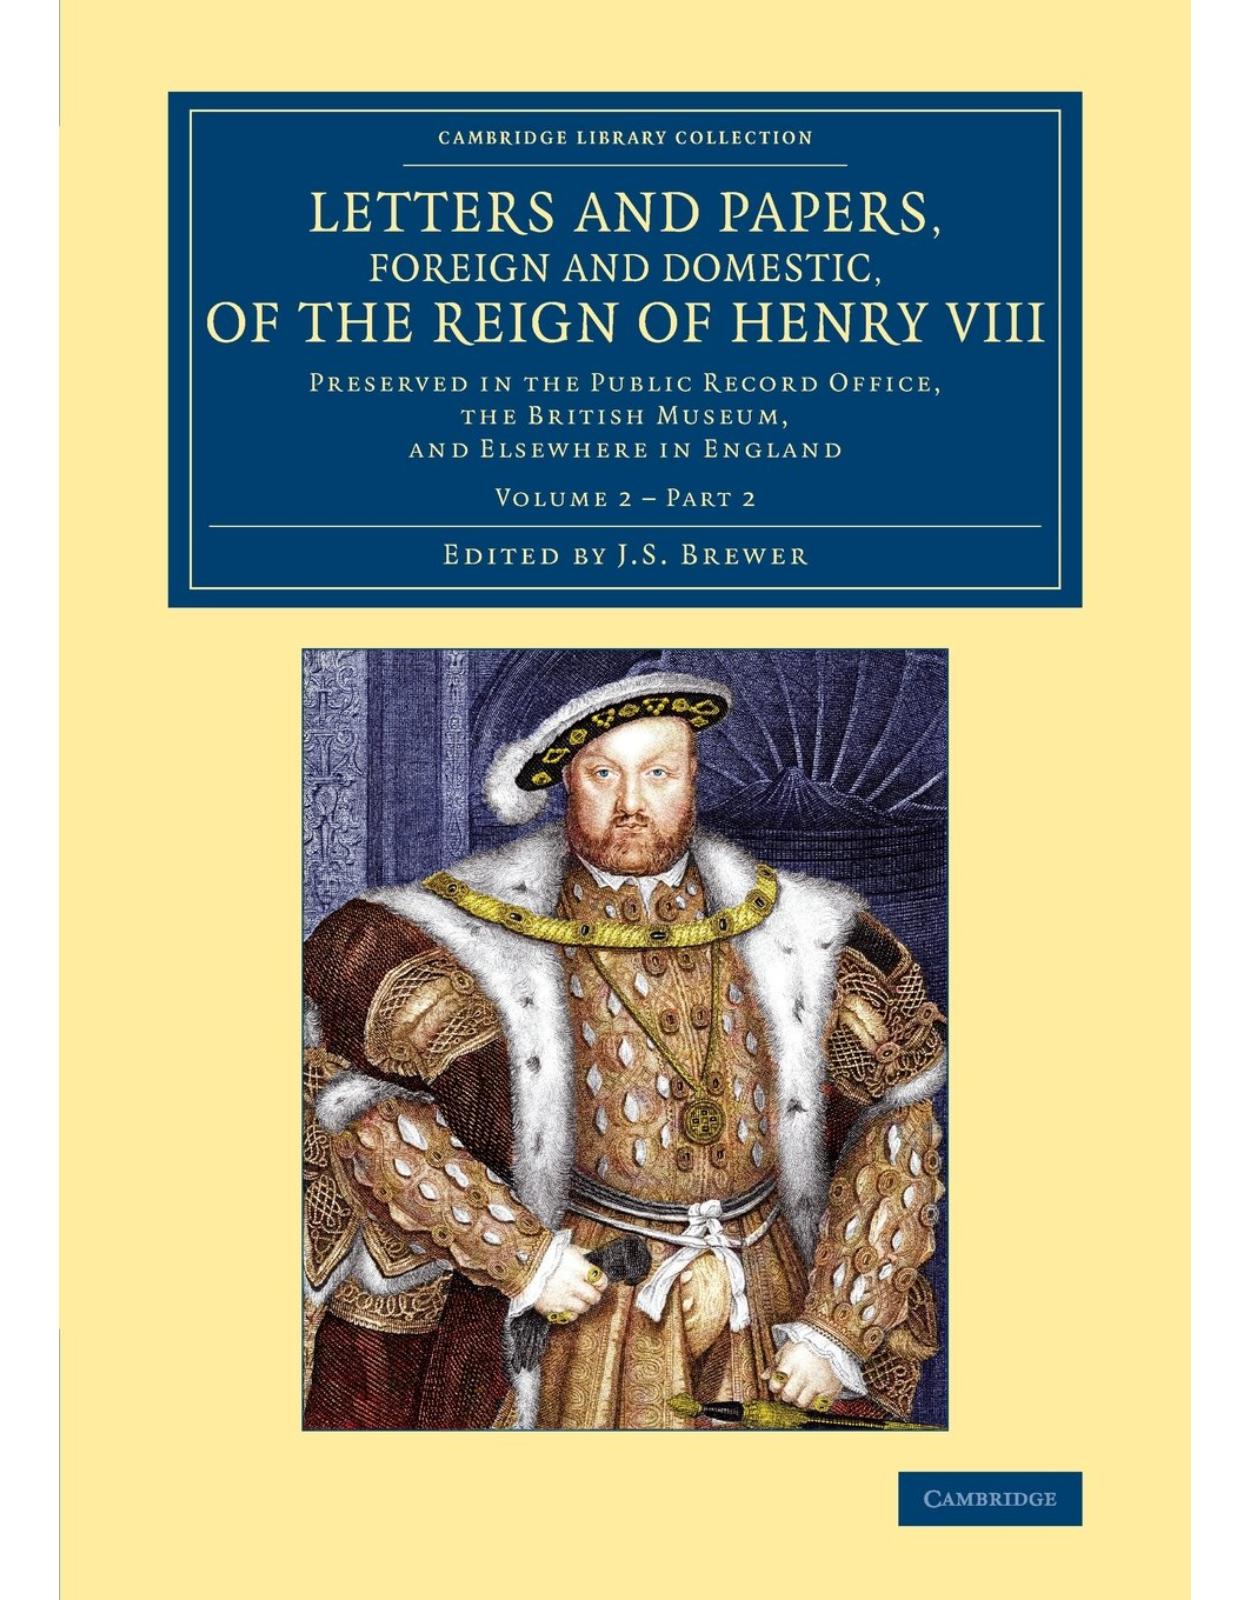 Letters and Papers, Foreign and Domestic, of the Reign of Henry VIII: Volume 2, Part 2: Preserved in the Public Record Office, the British Museum, and ... and Irish History, 15th & 16th Centuries)